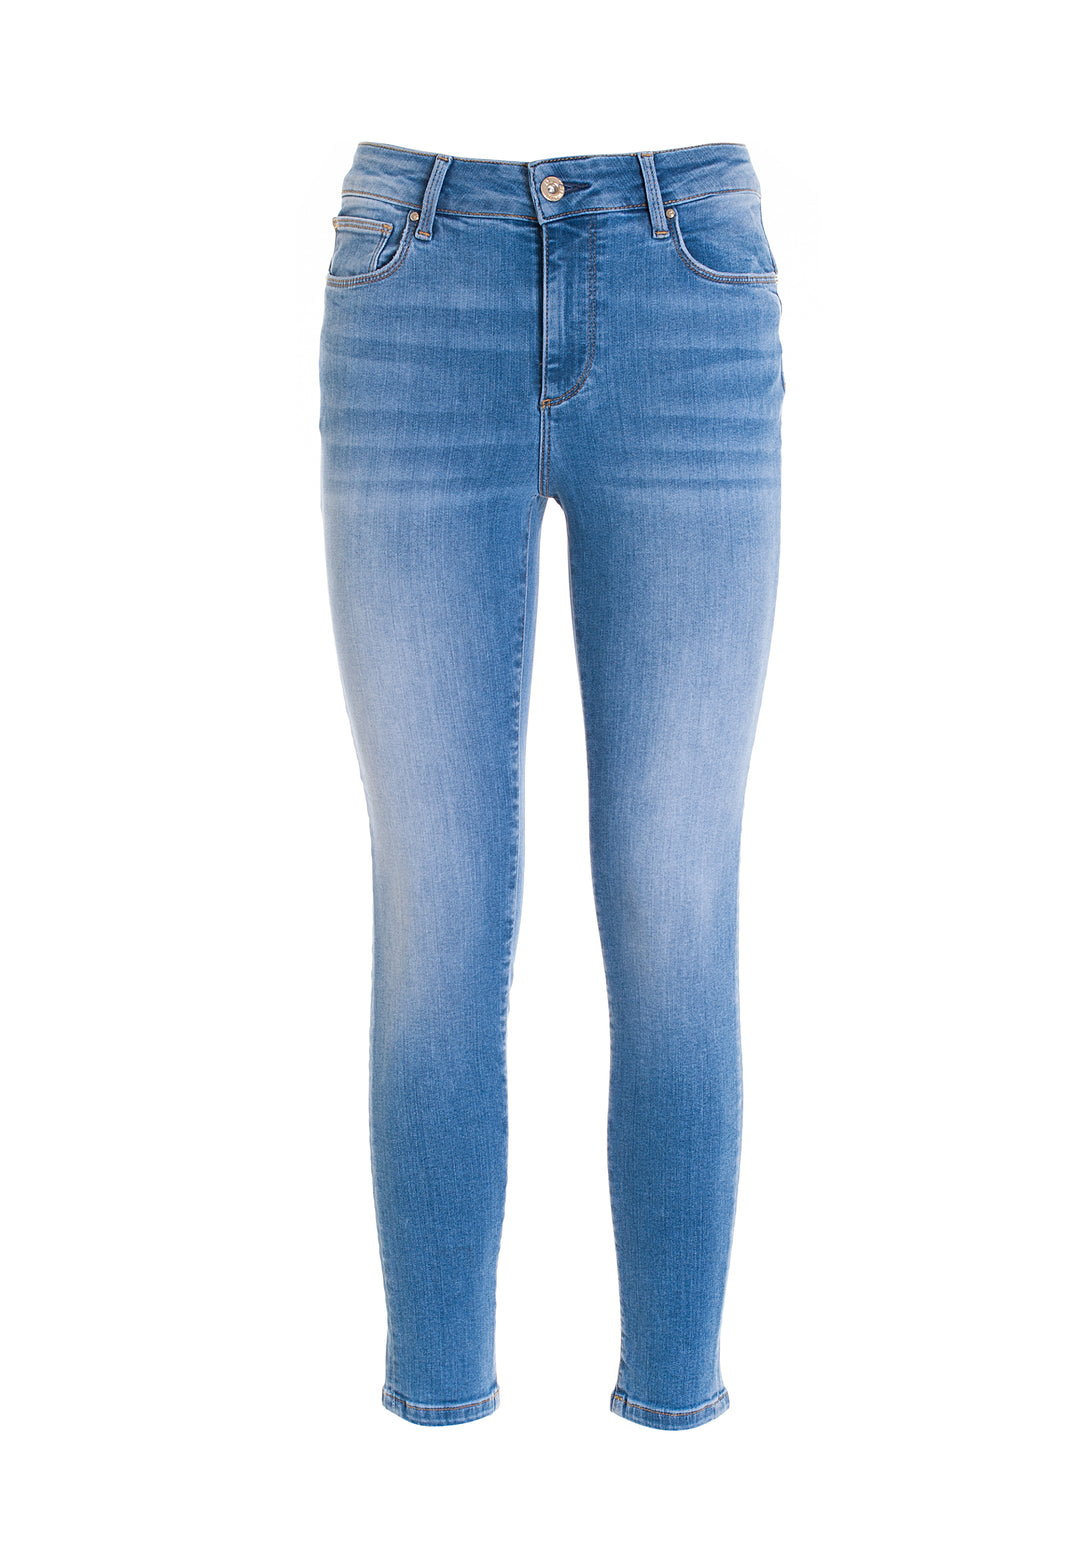 Jeans skinny fit with shape-up effect made in denim with bleached wash